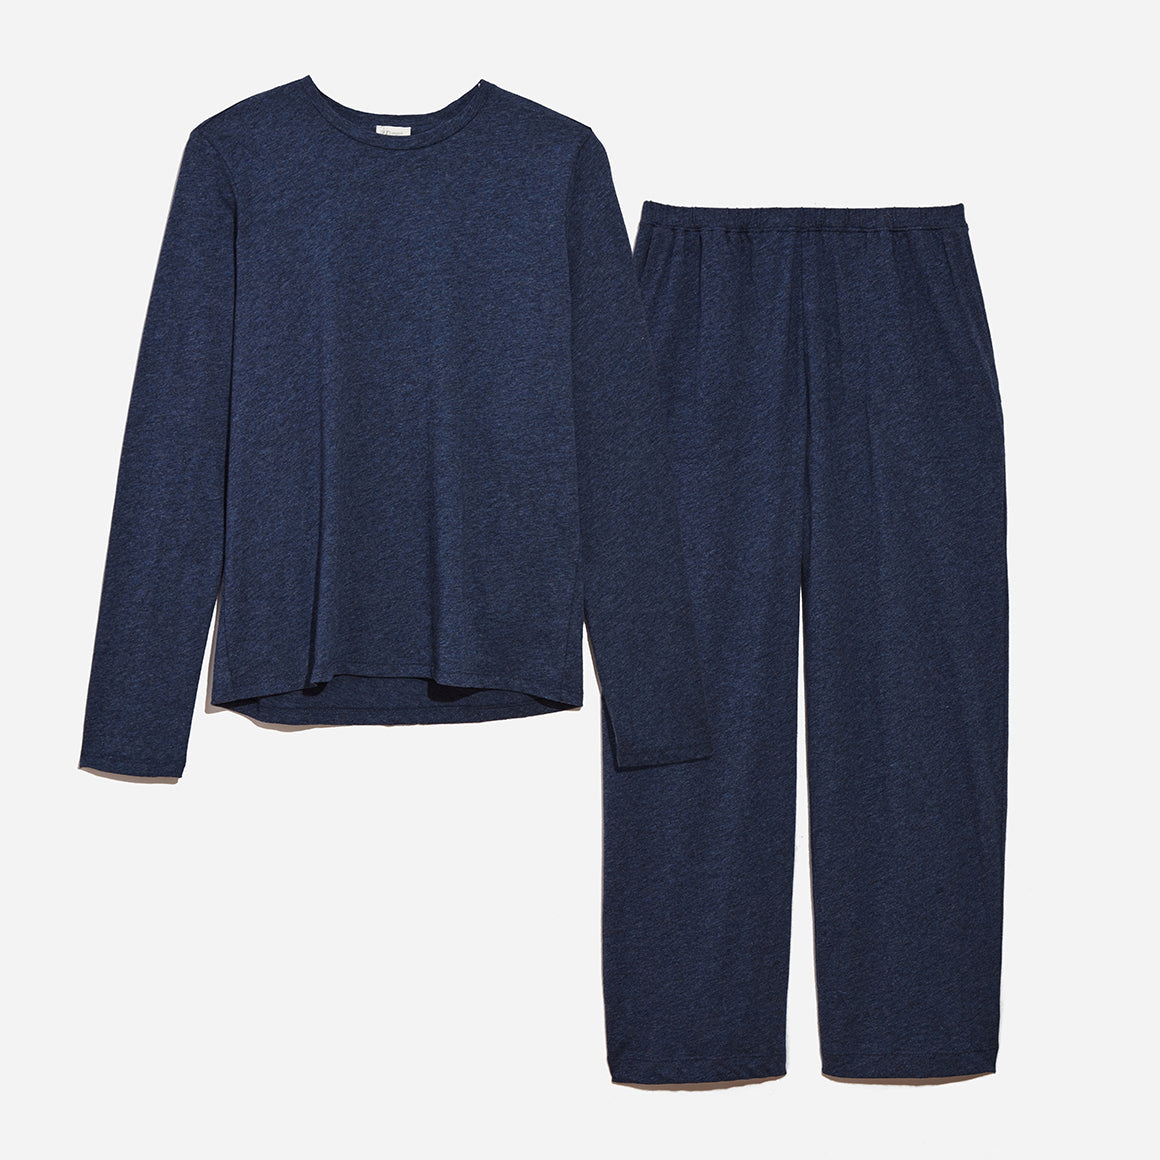 Image #1: Long sleeve crewneck top and pant loungewear set in midnight colorway. Shot against light grey background.